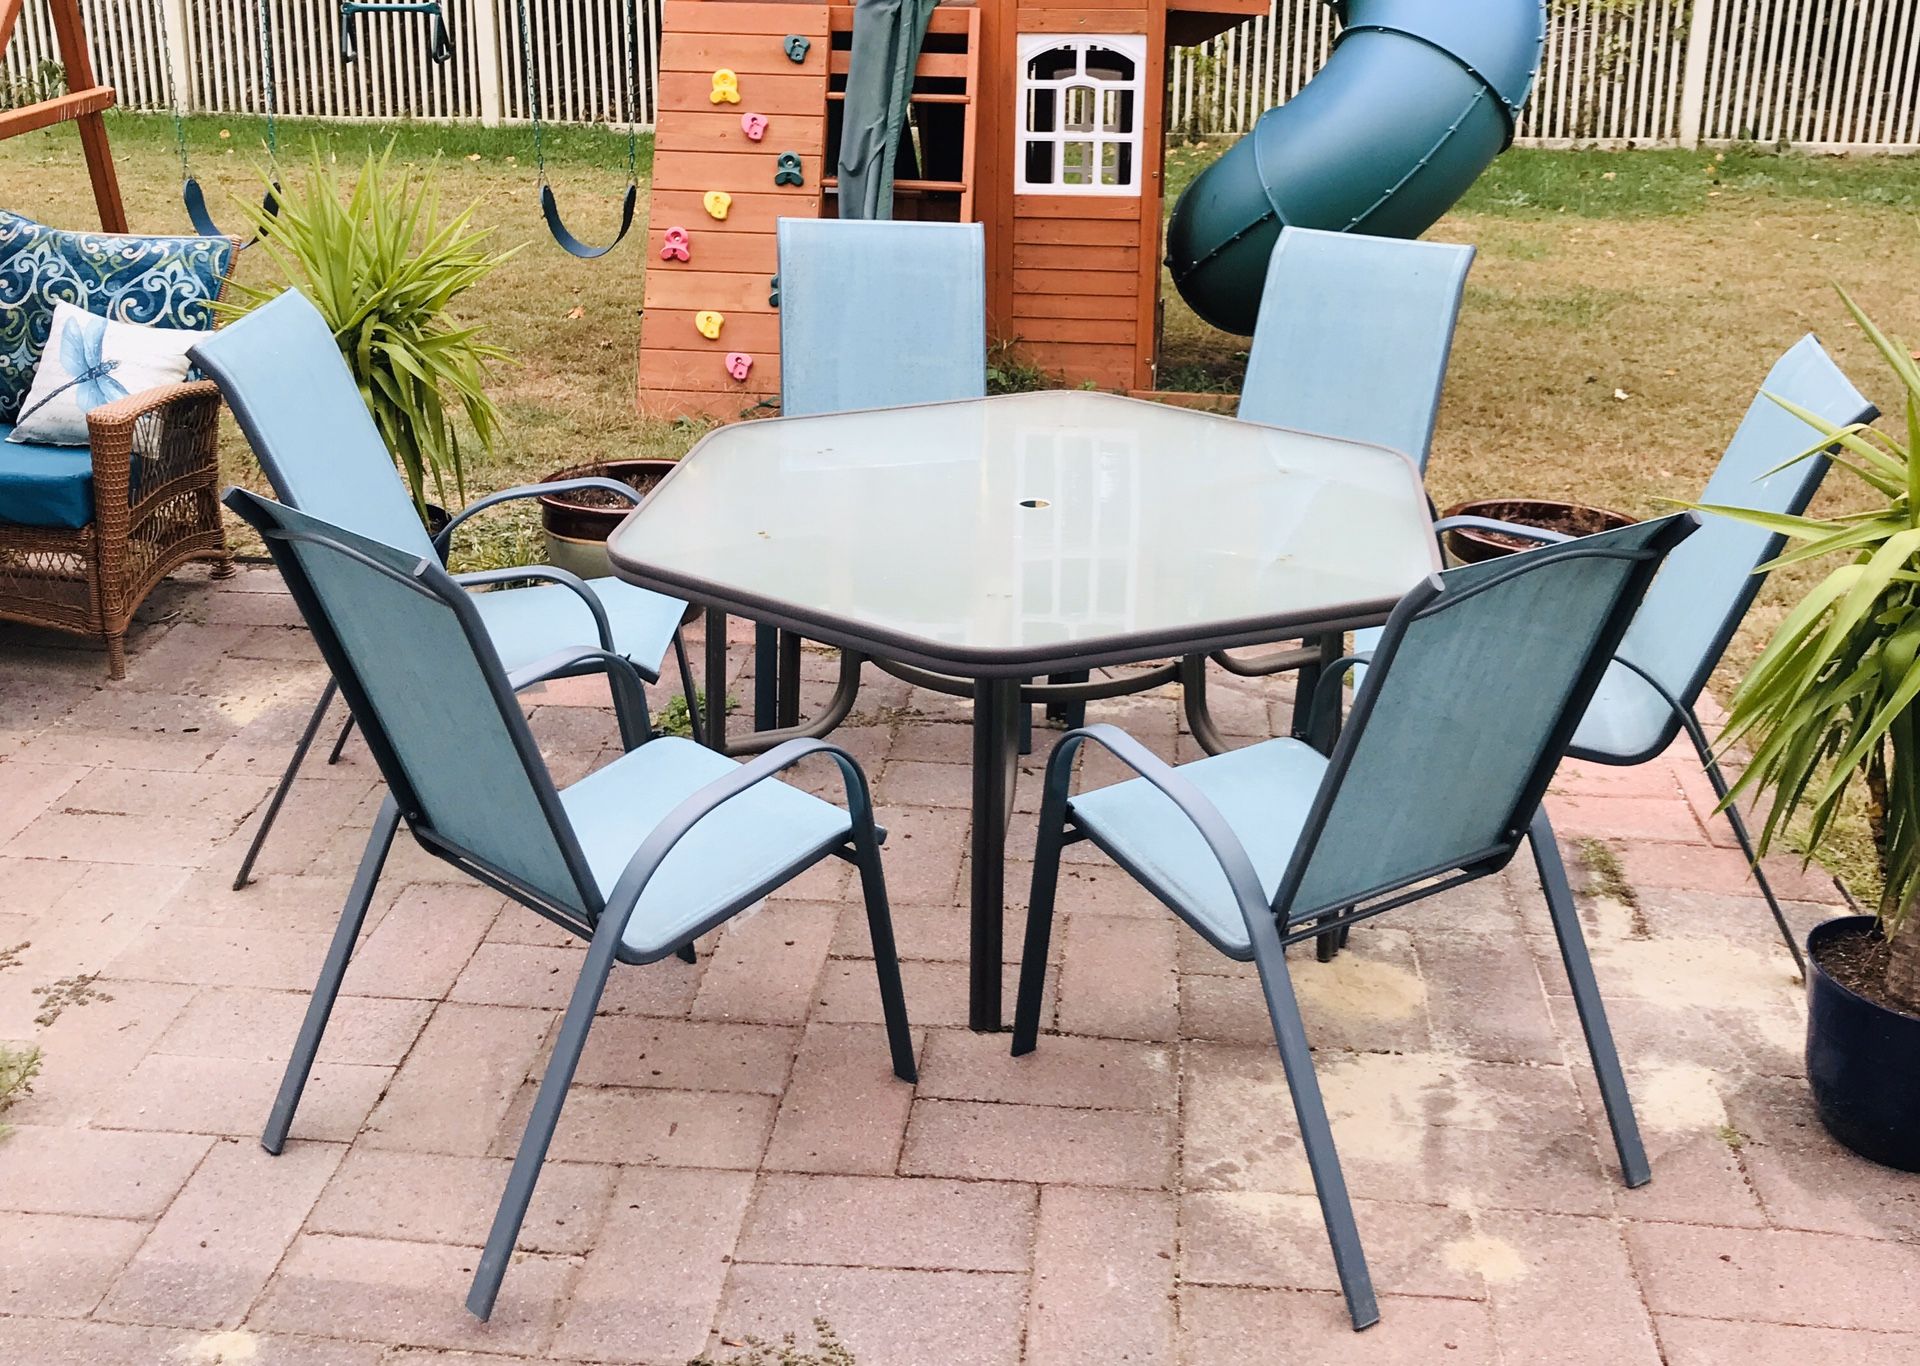 Patio Table and Chairs / Play Set NOT for Sale